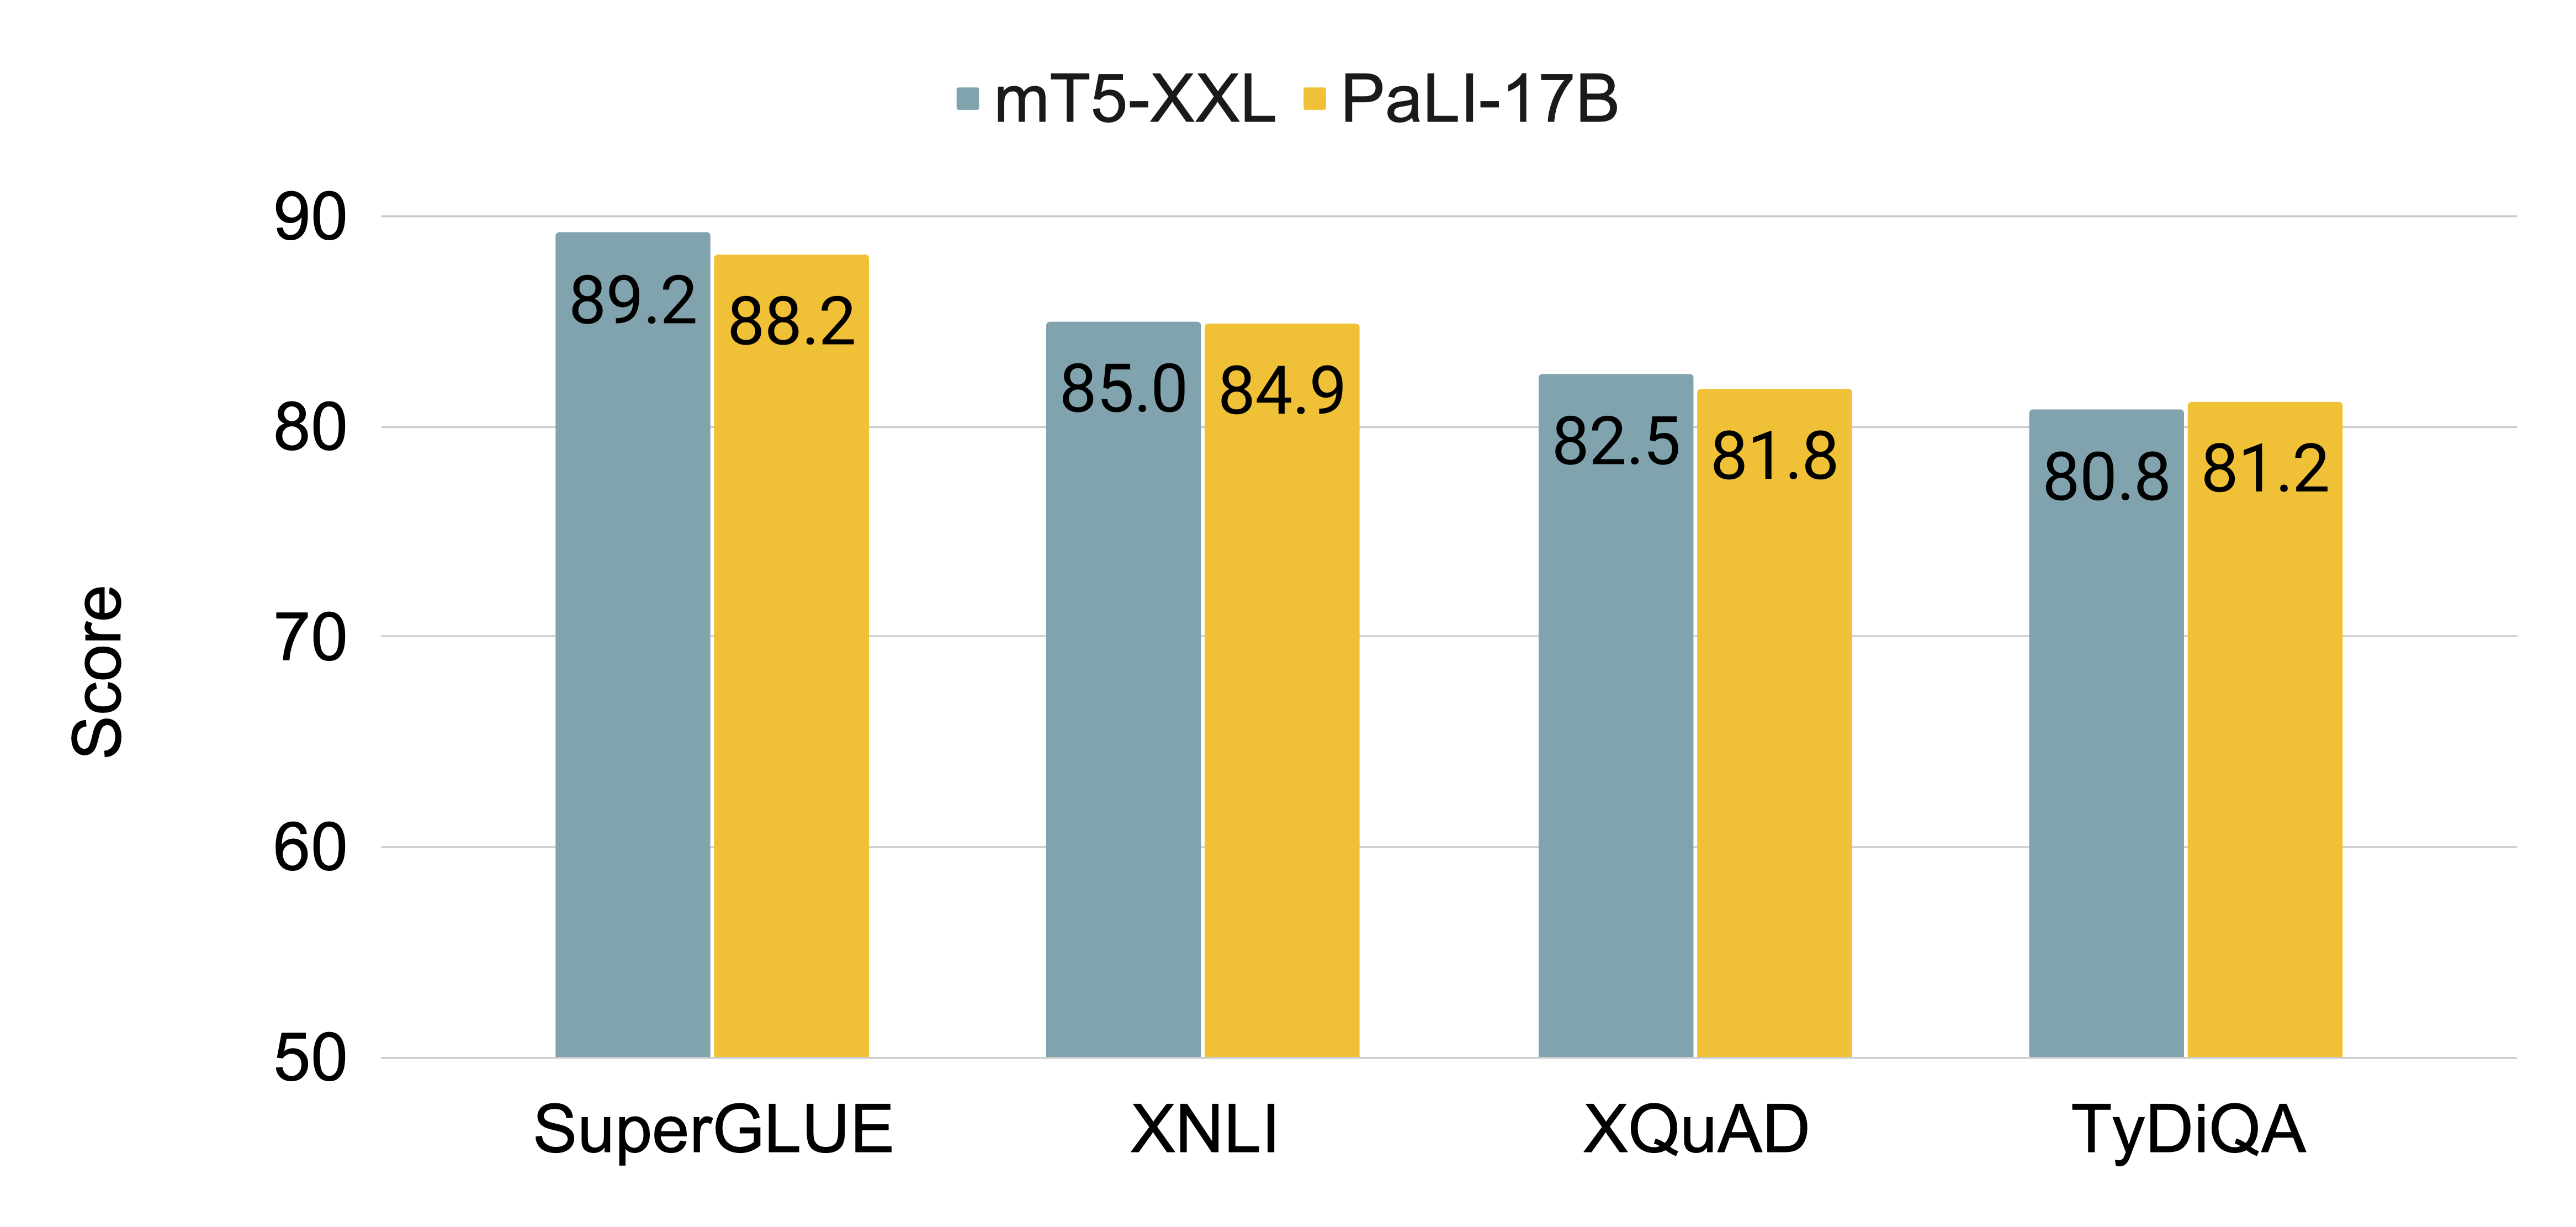 Plot showing the quality of the PaLI model on various language benchmarks, compared to mT5-XXL